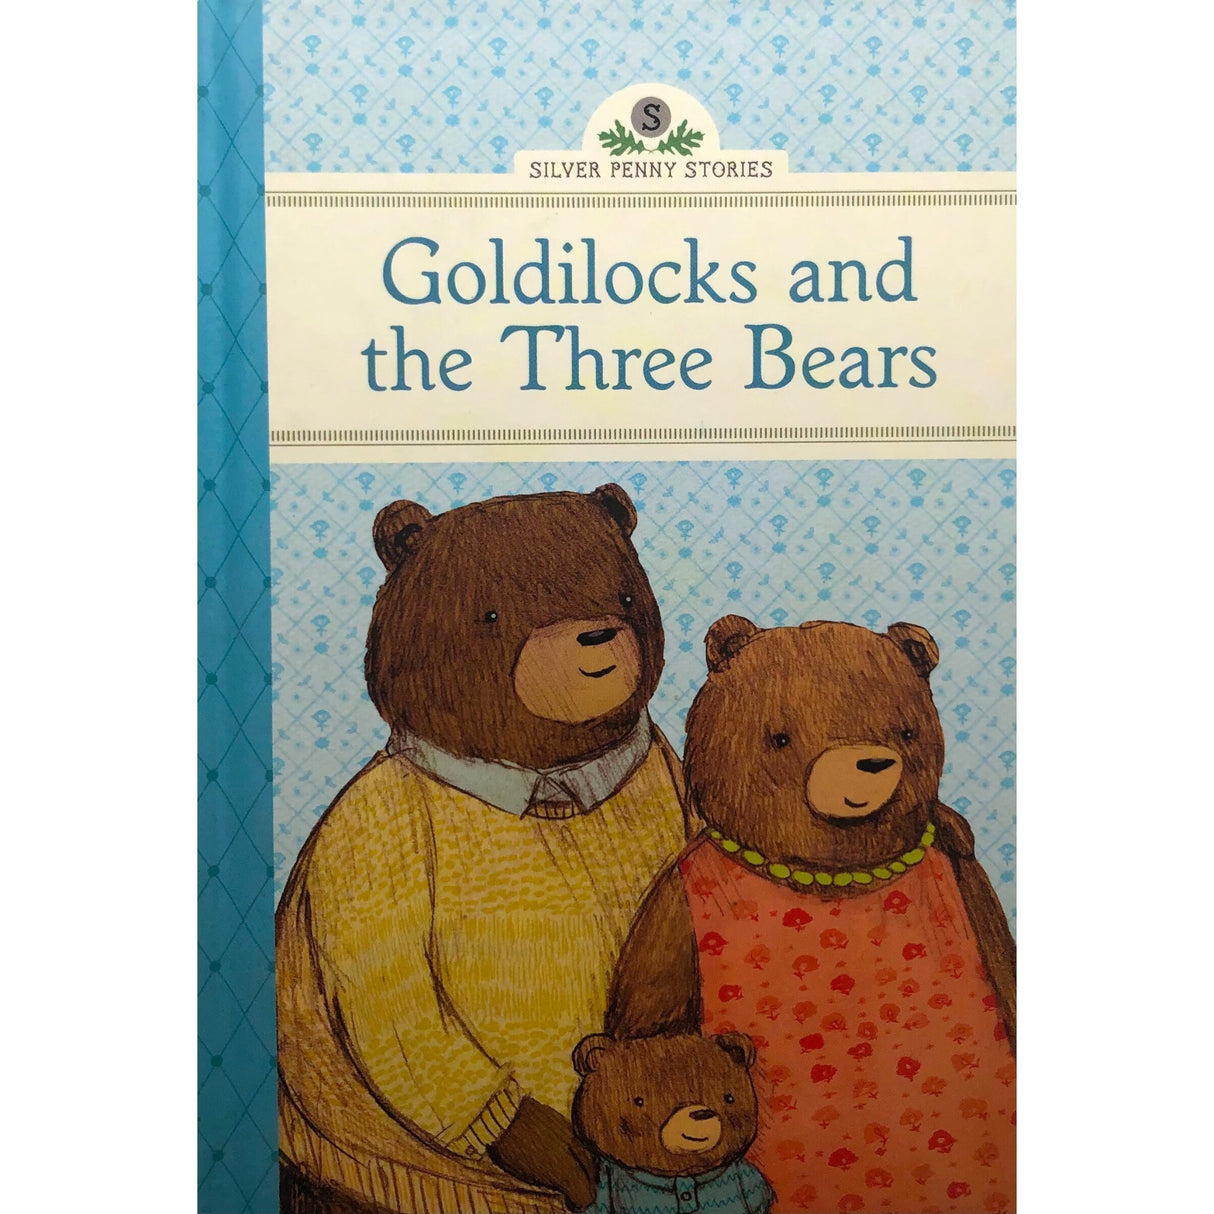 A second CHance - Goldilocks and the three bears